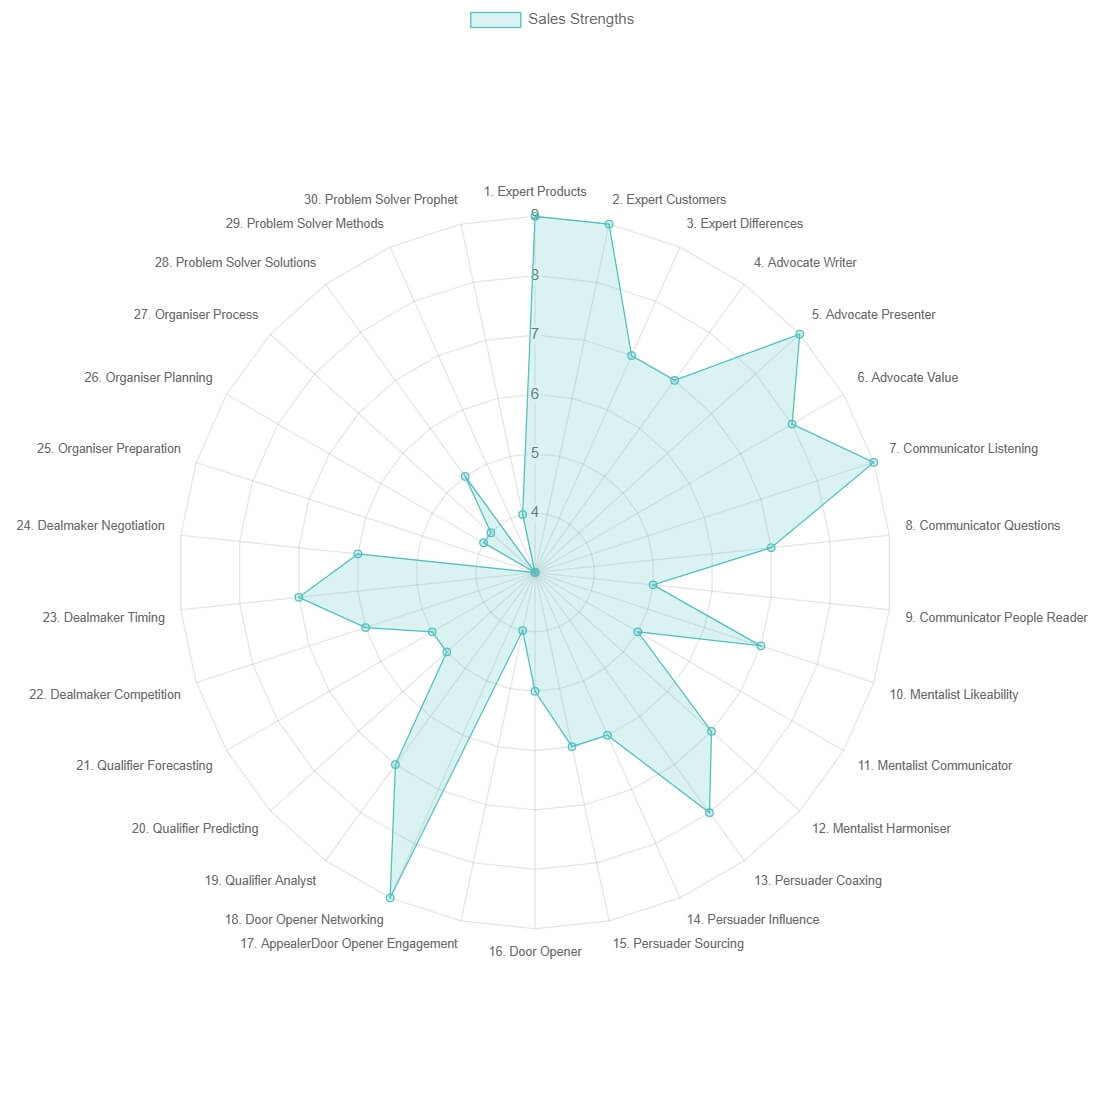 A radar chart illustrating example scores from our sales skills assessment.